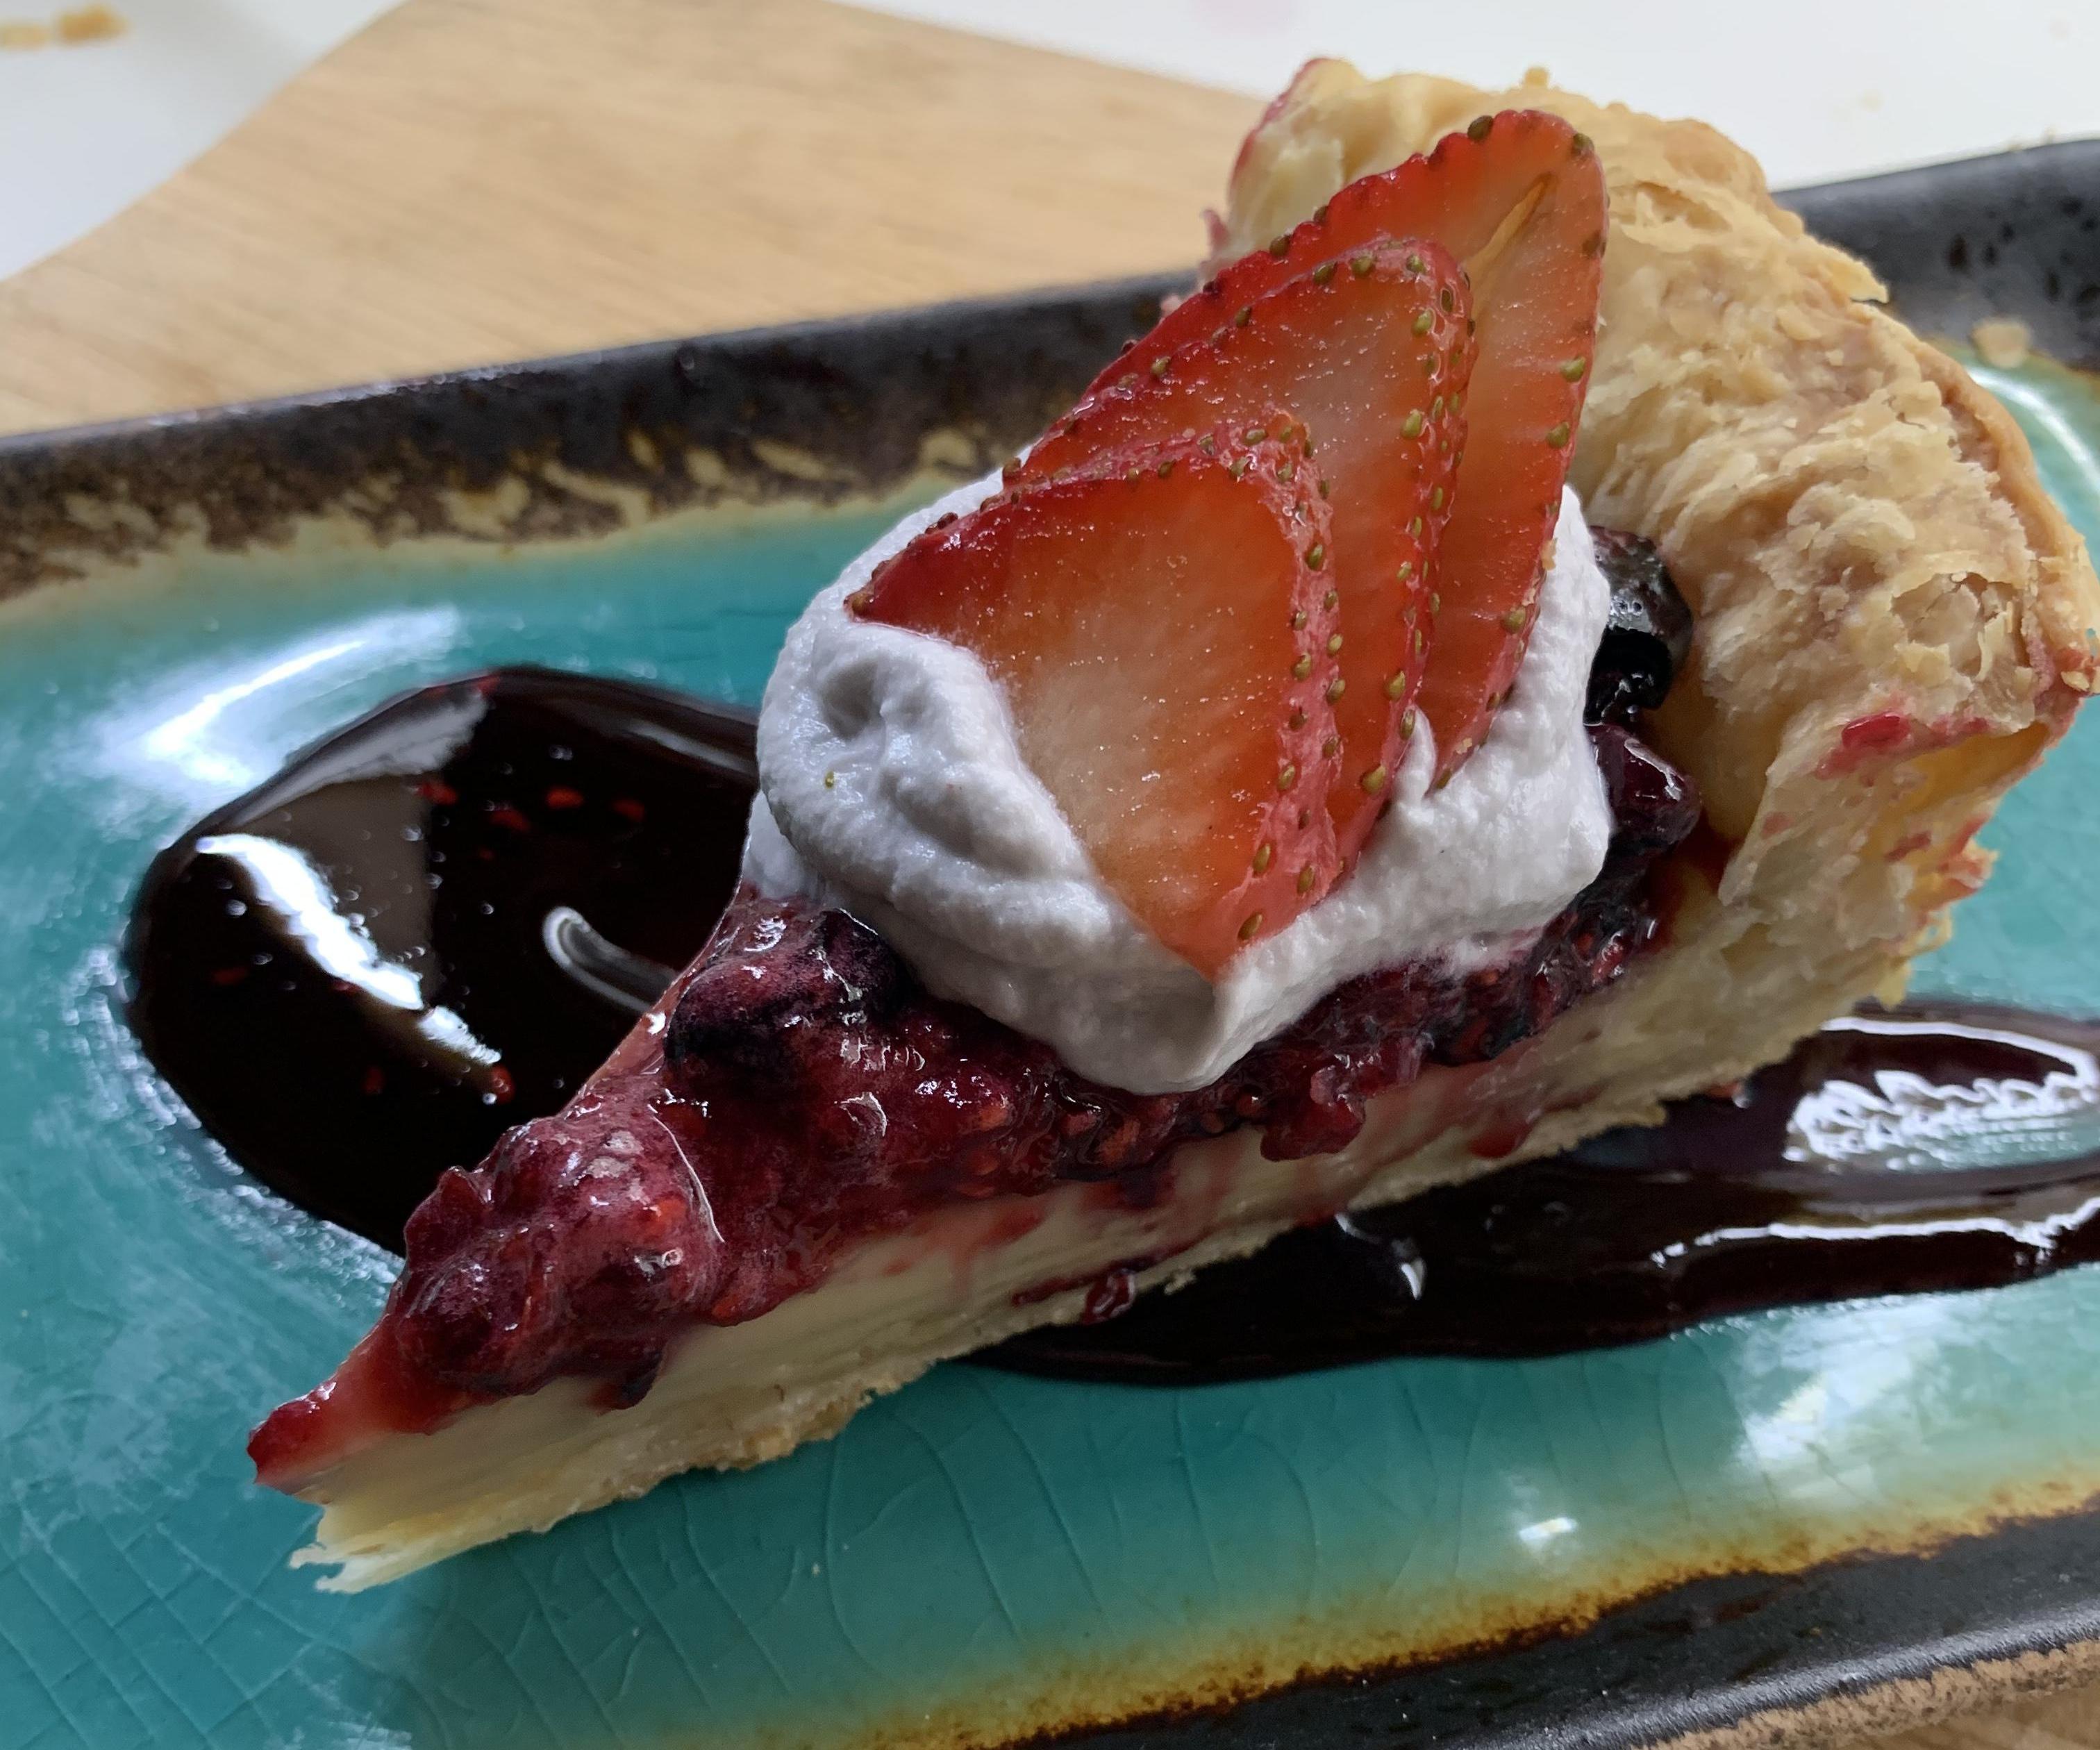 Creamy Custard Pie With a Mixed Berry Compote